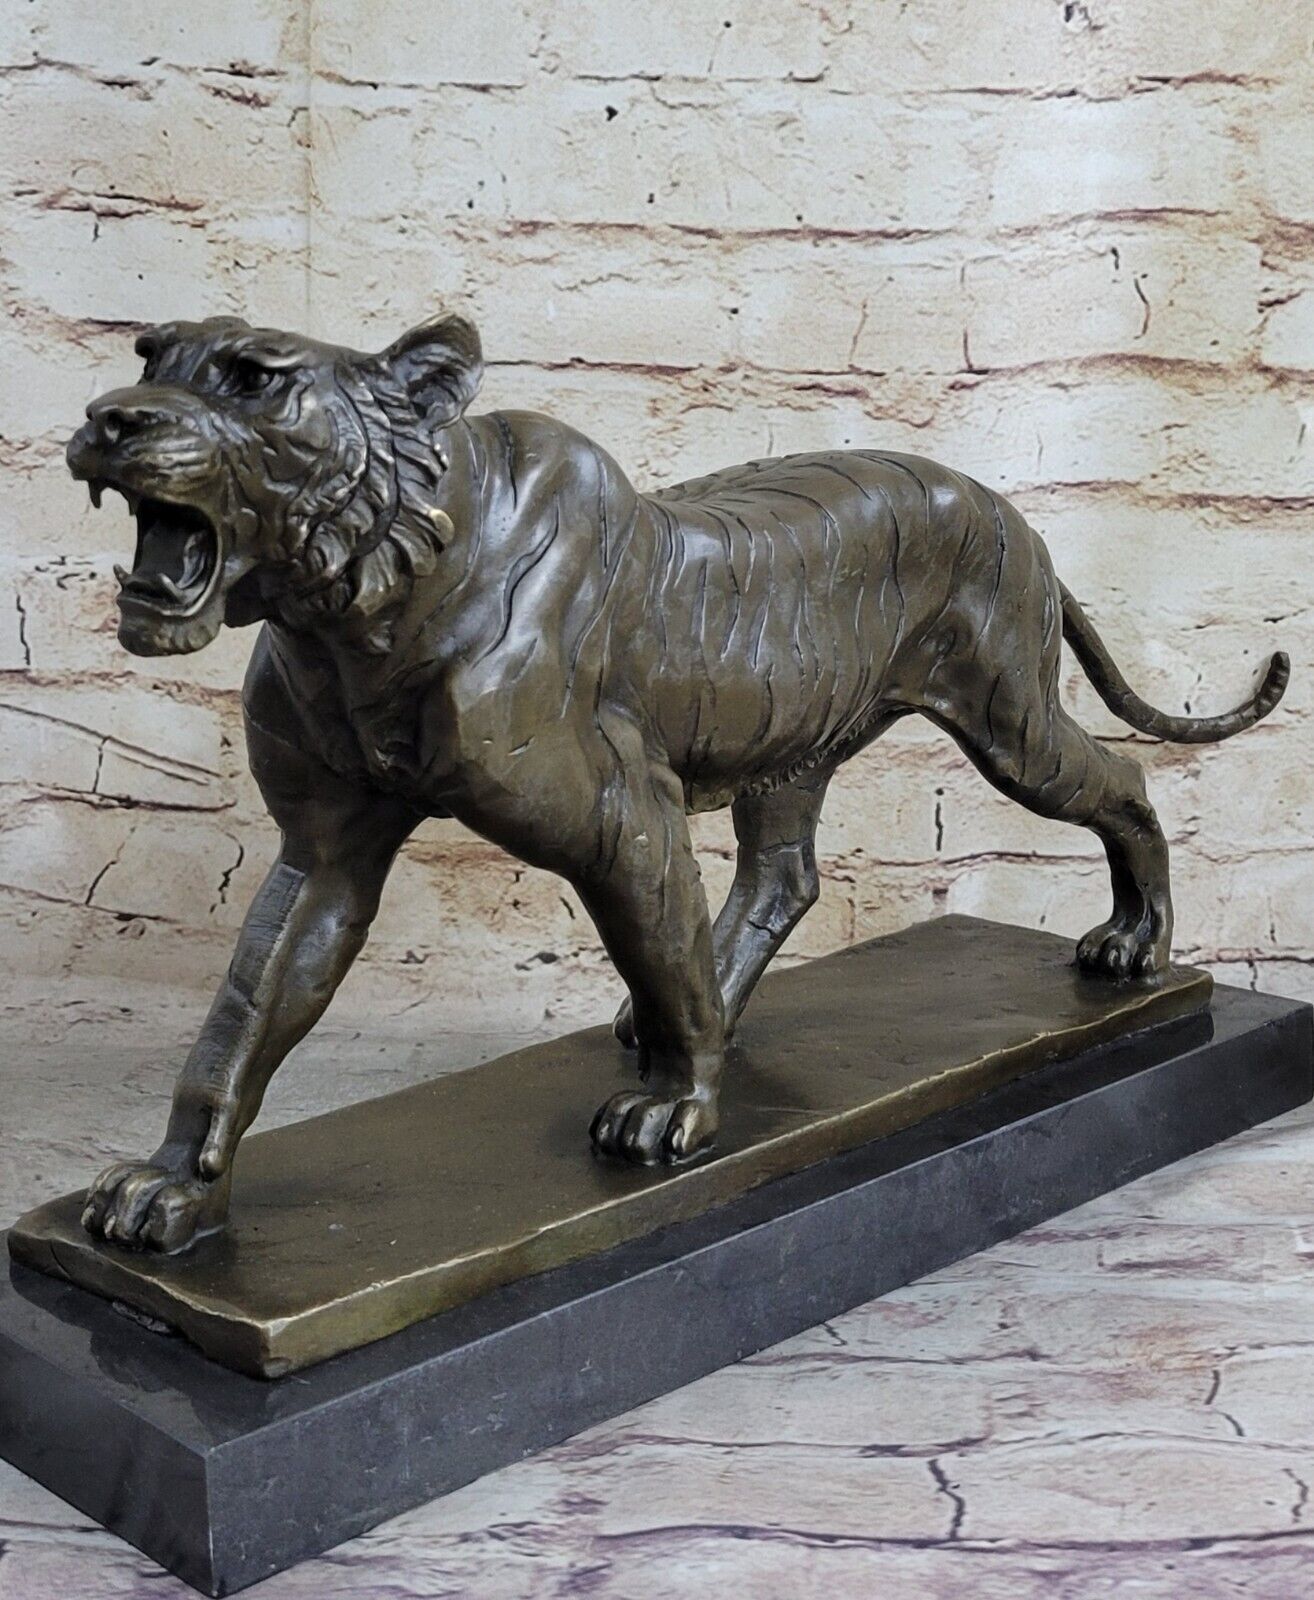 Early 20thC EUROPEAN BRONZE TIGER Artist by Barye on Marble Base Figurine Statue